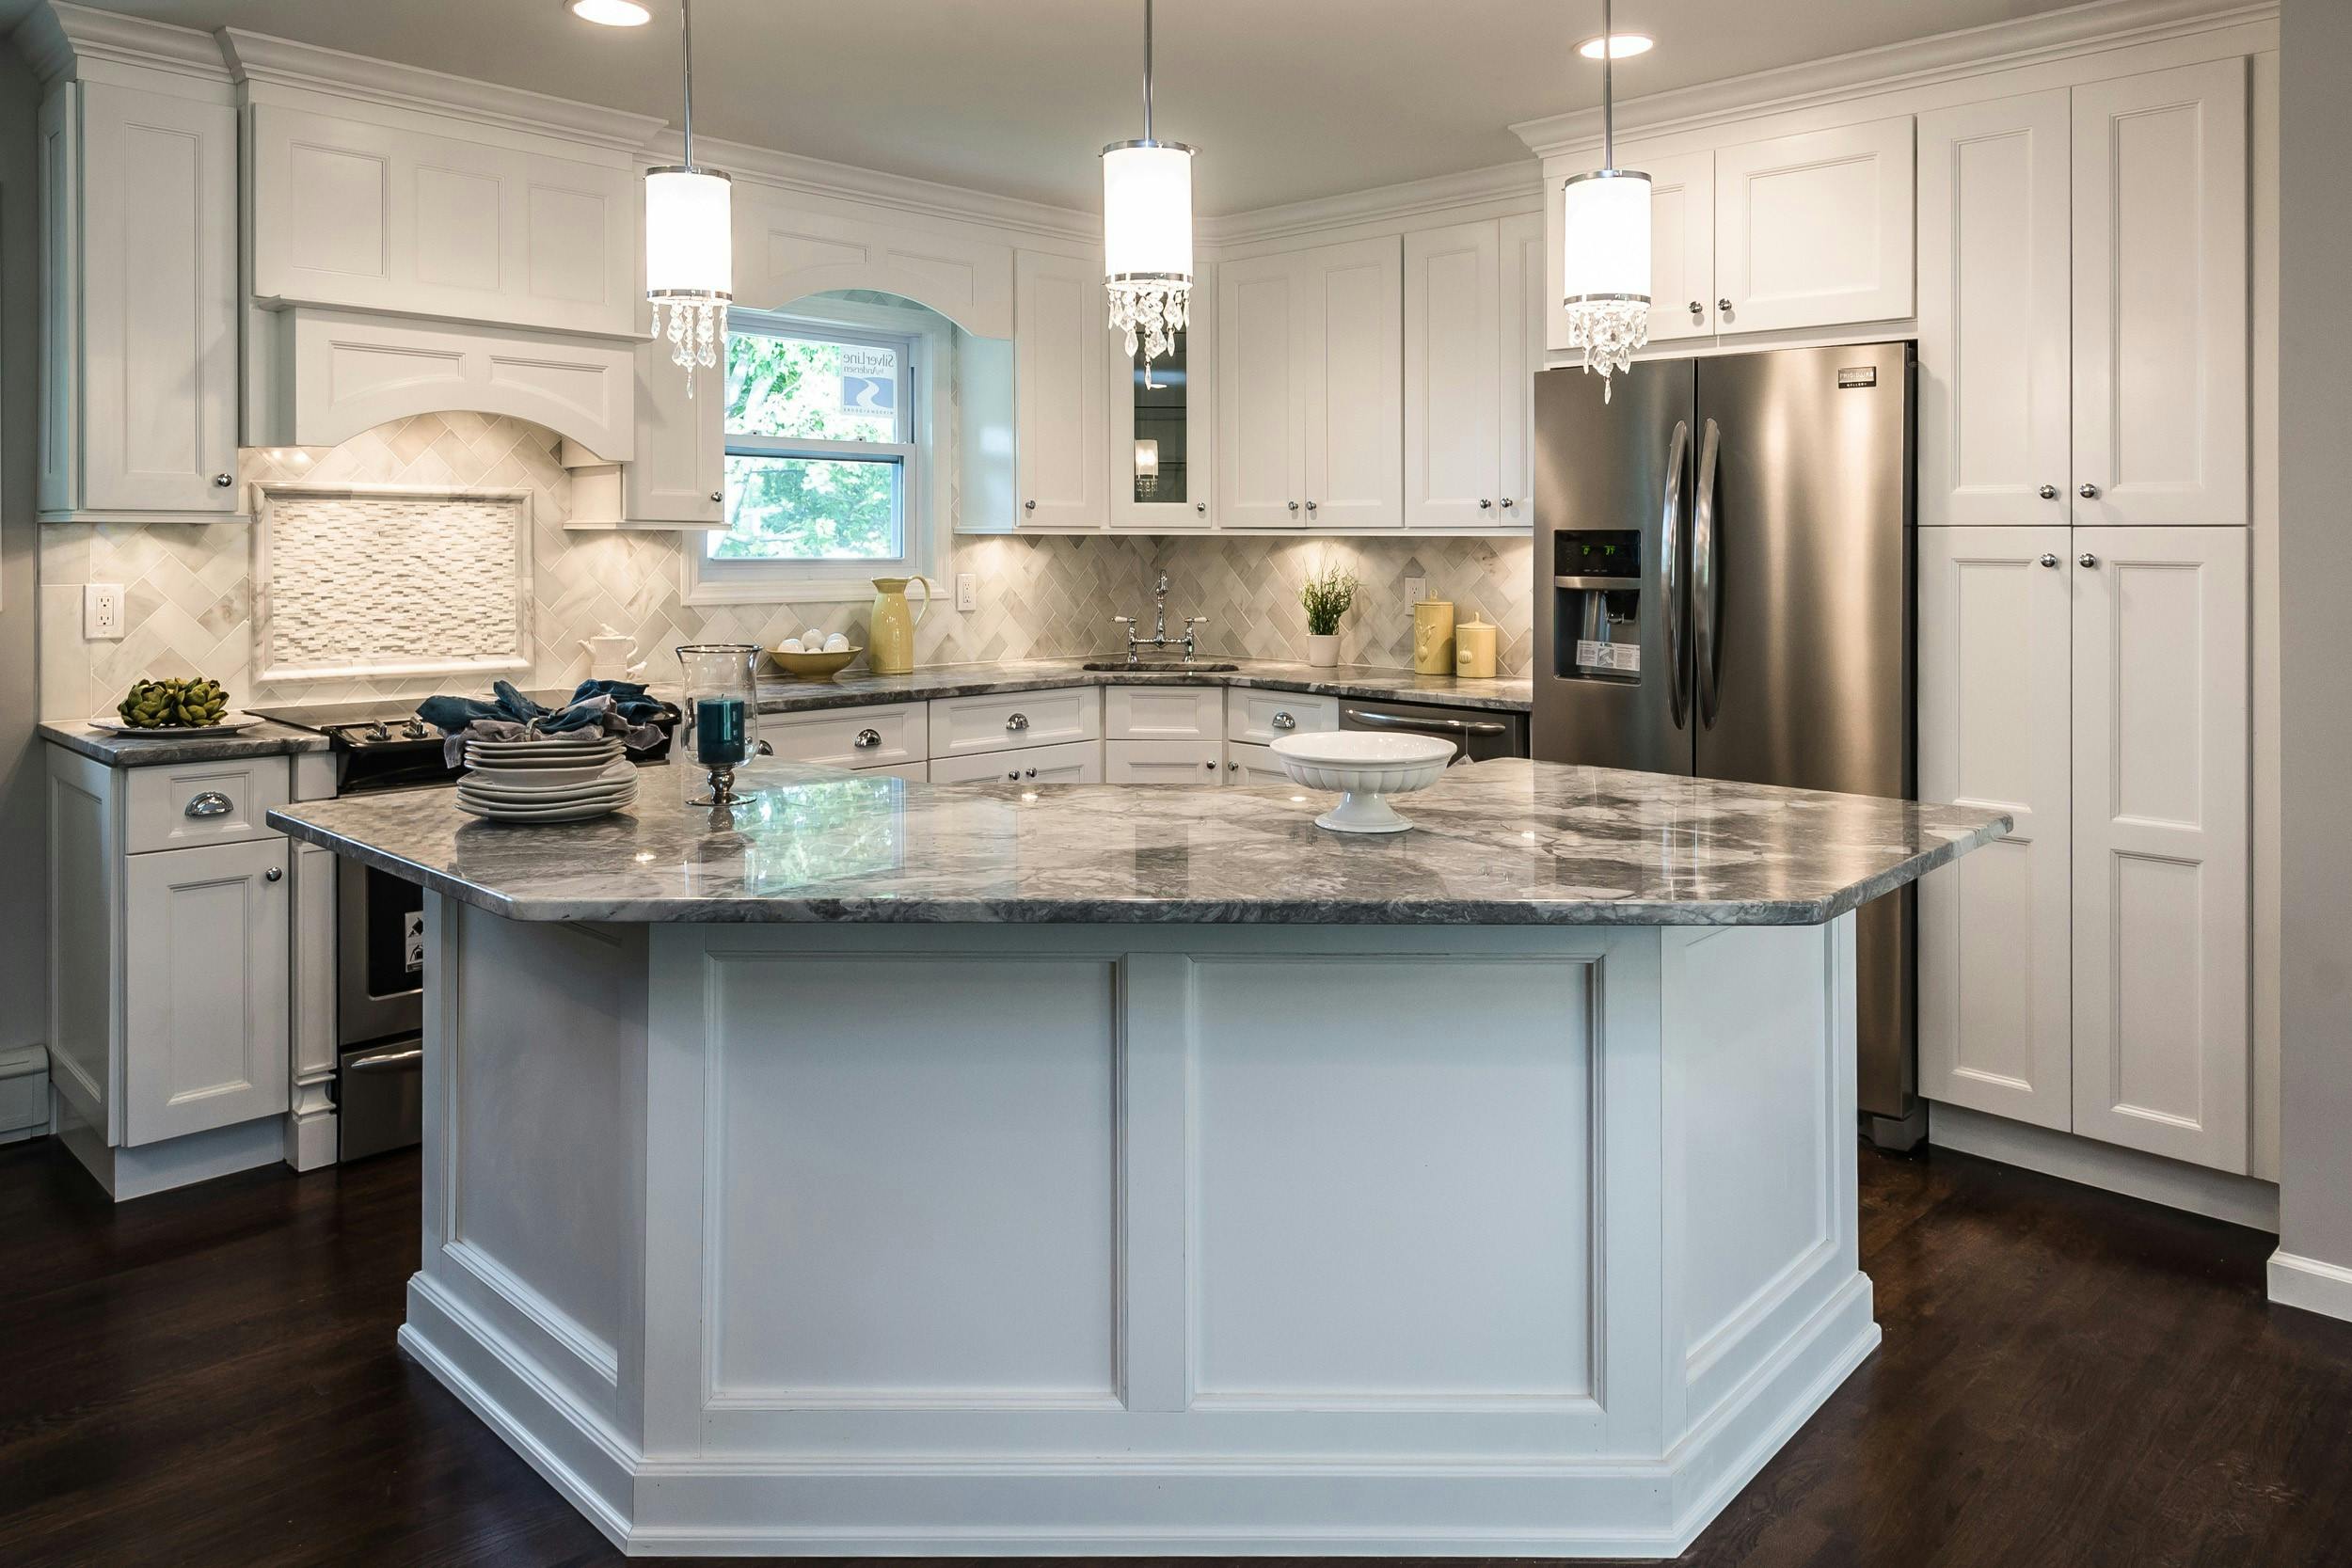 Kitchen Countertops And Cabinets, How Much Are New Kitchen Cabinets And Countertops